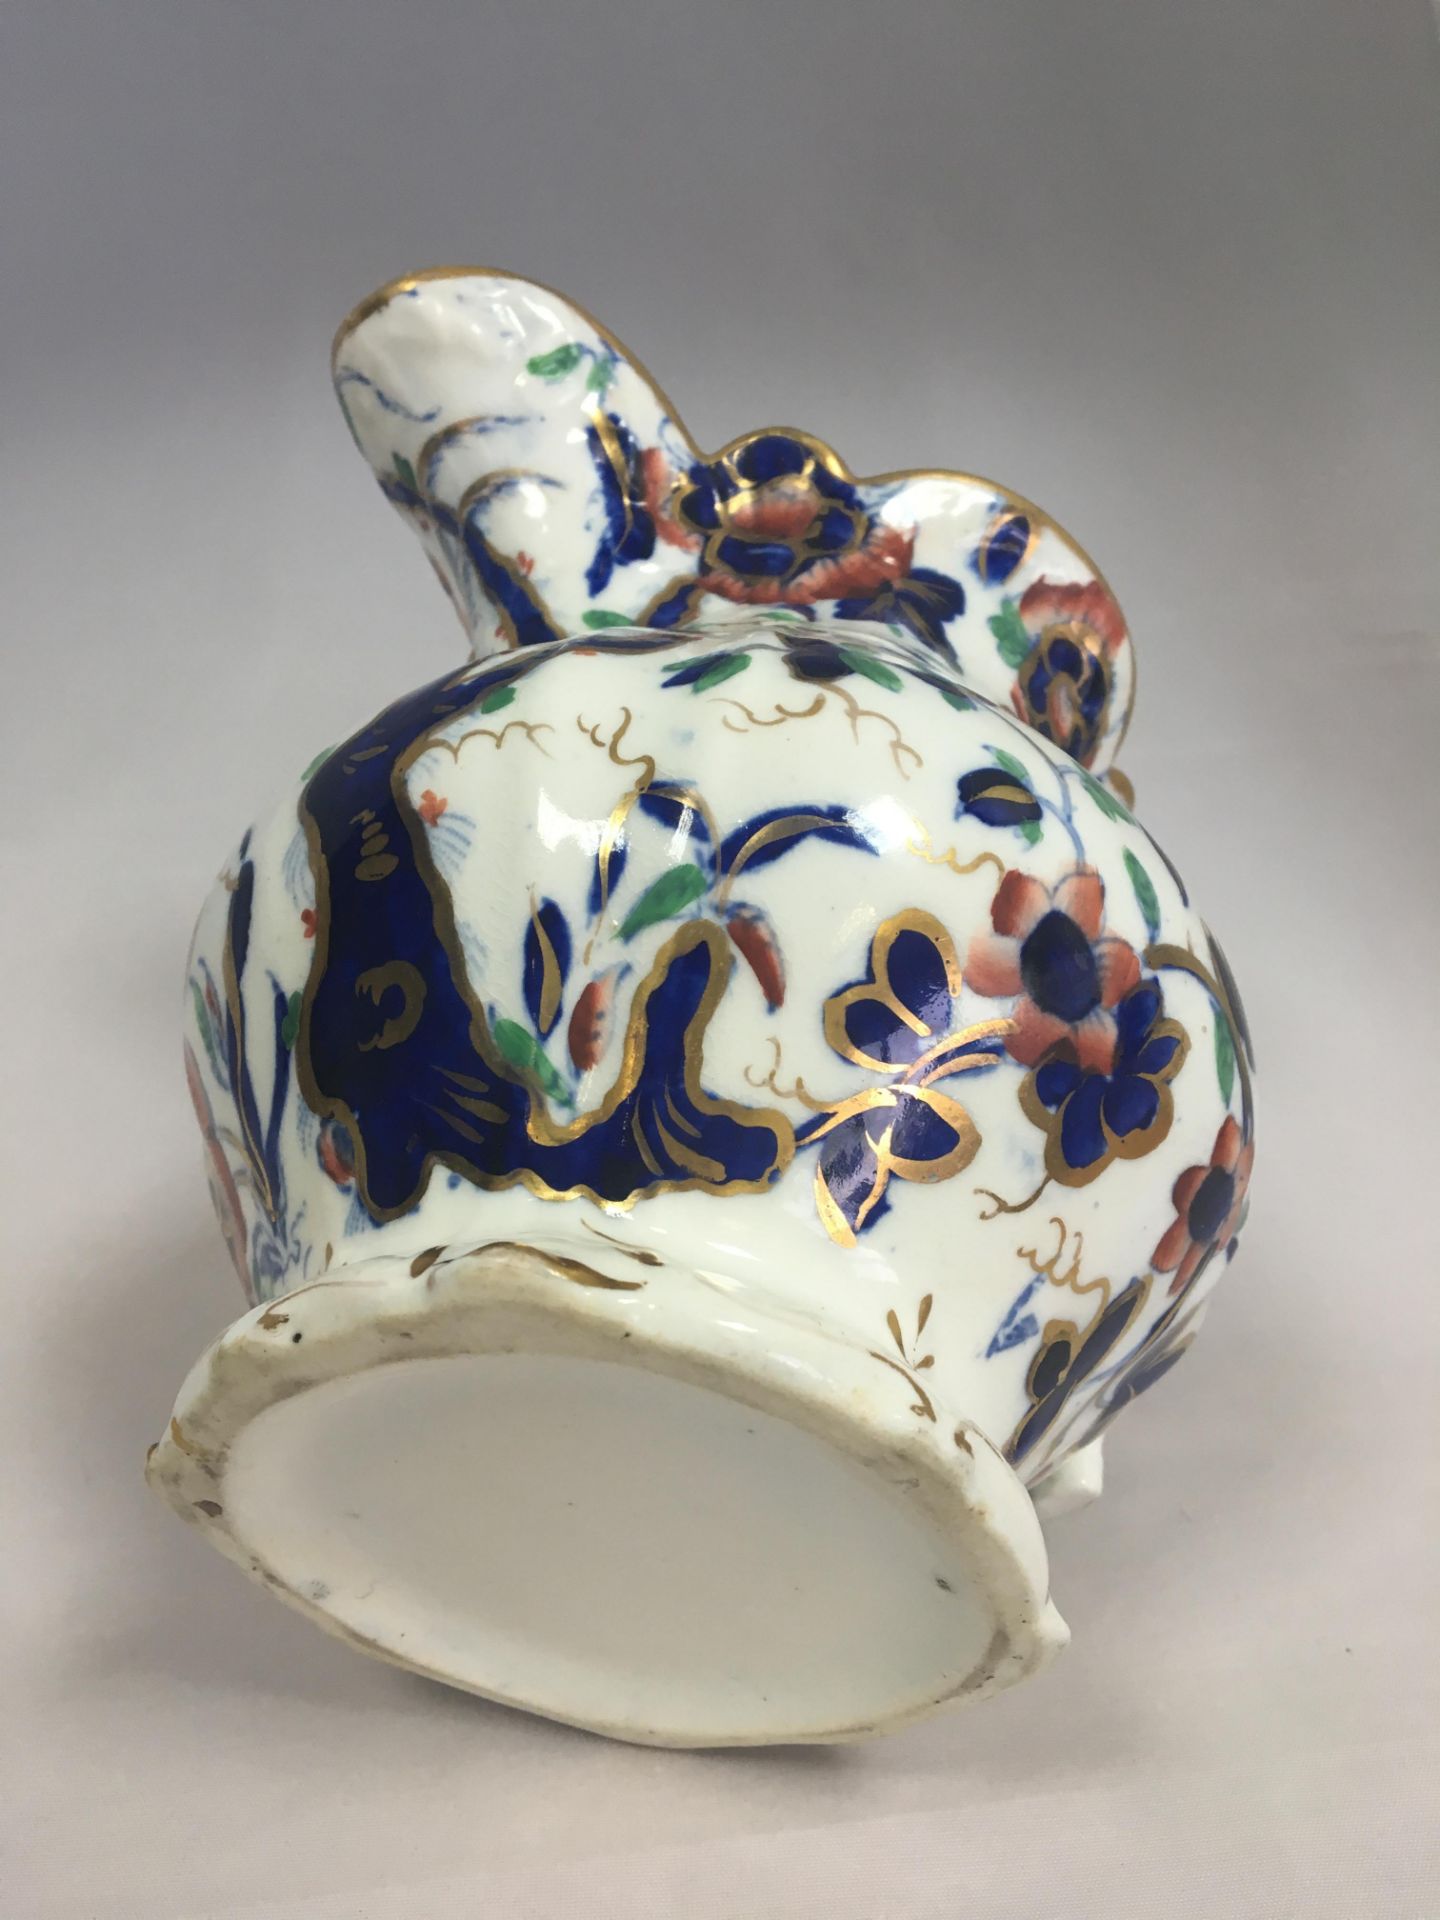 A 19TH CENTURY STAFFORDSHIRE IMARI JUG. HANDPAINTED WITH GILT EDGING. FREE UK DELIVERY. - Image 2 of 5